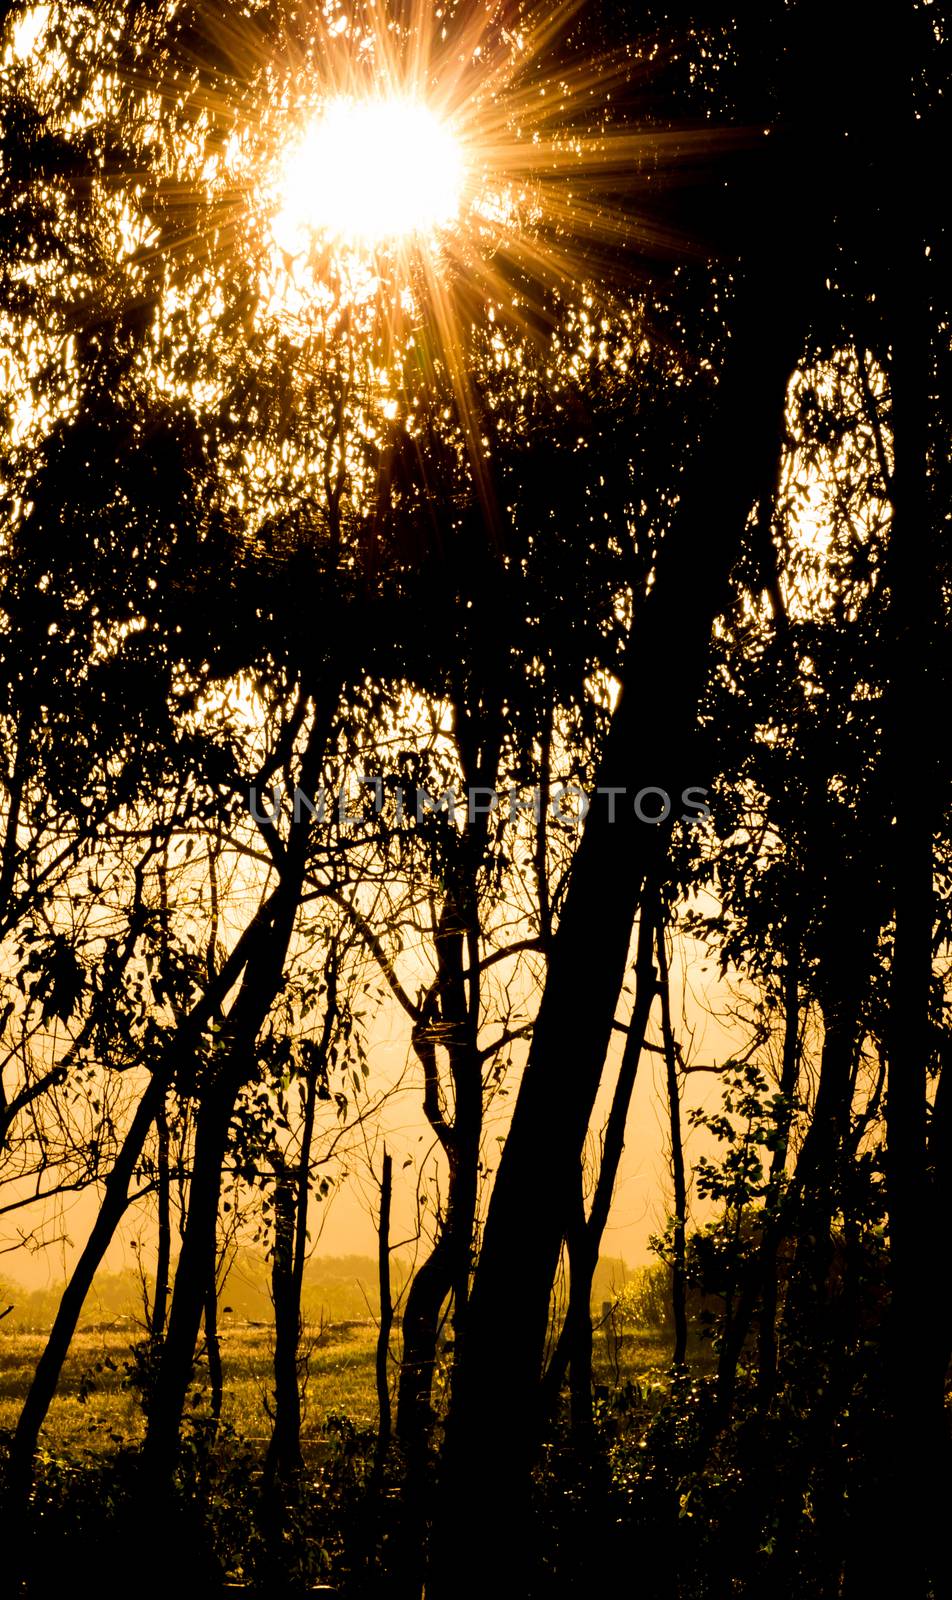 Sunset starburst and silhoetted trees of a forest